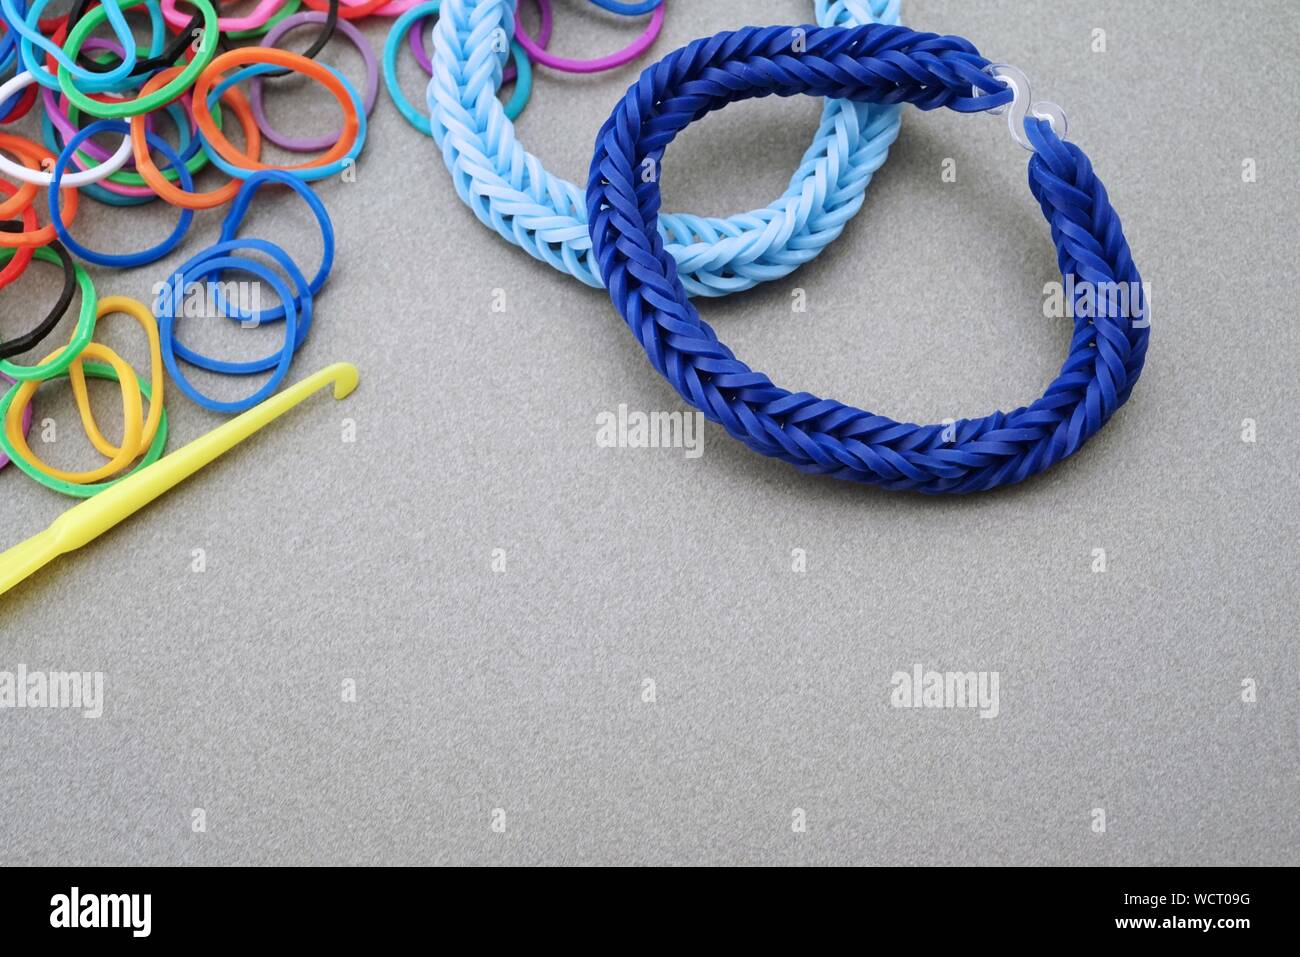 High Angle View Of Bracelets Made From Rubber Bands On Table Stock Photo